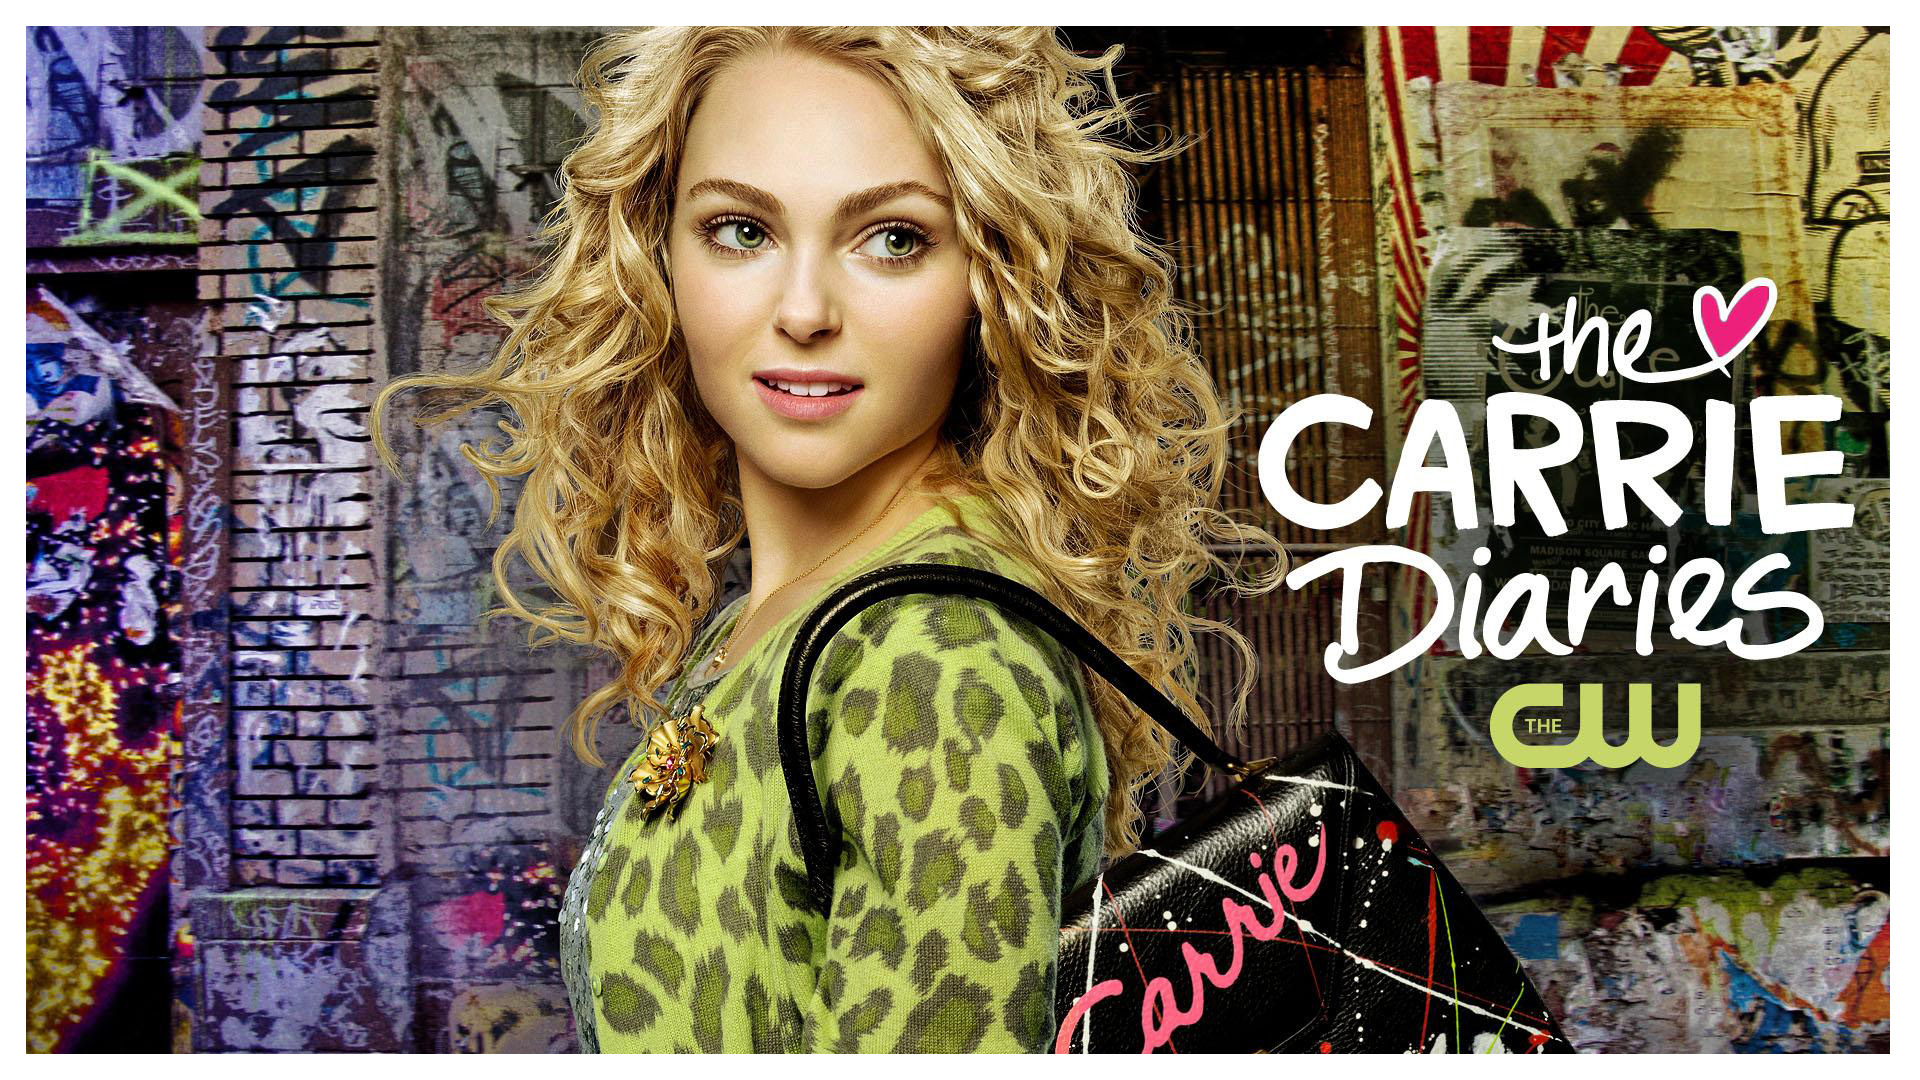 The Carrie Diaries #1